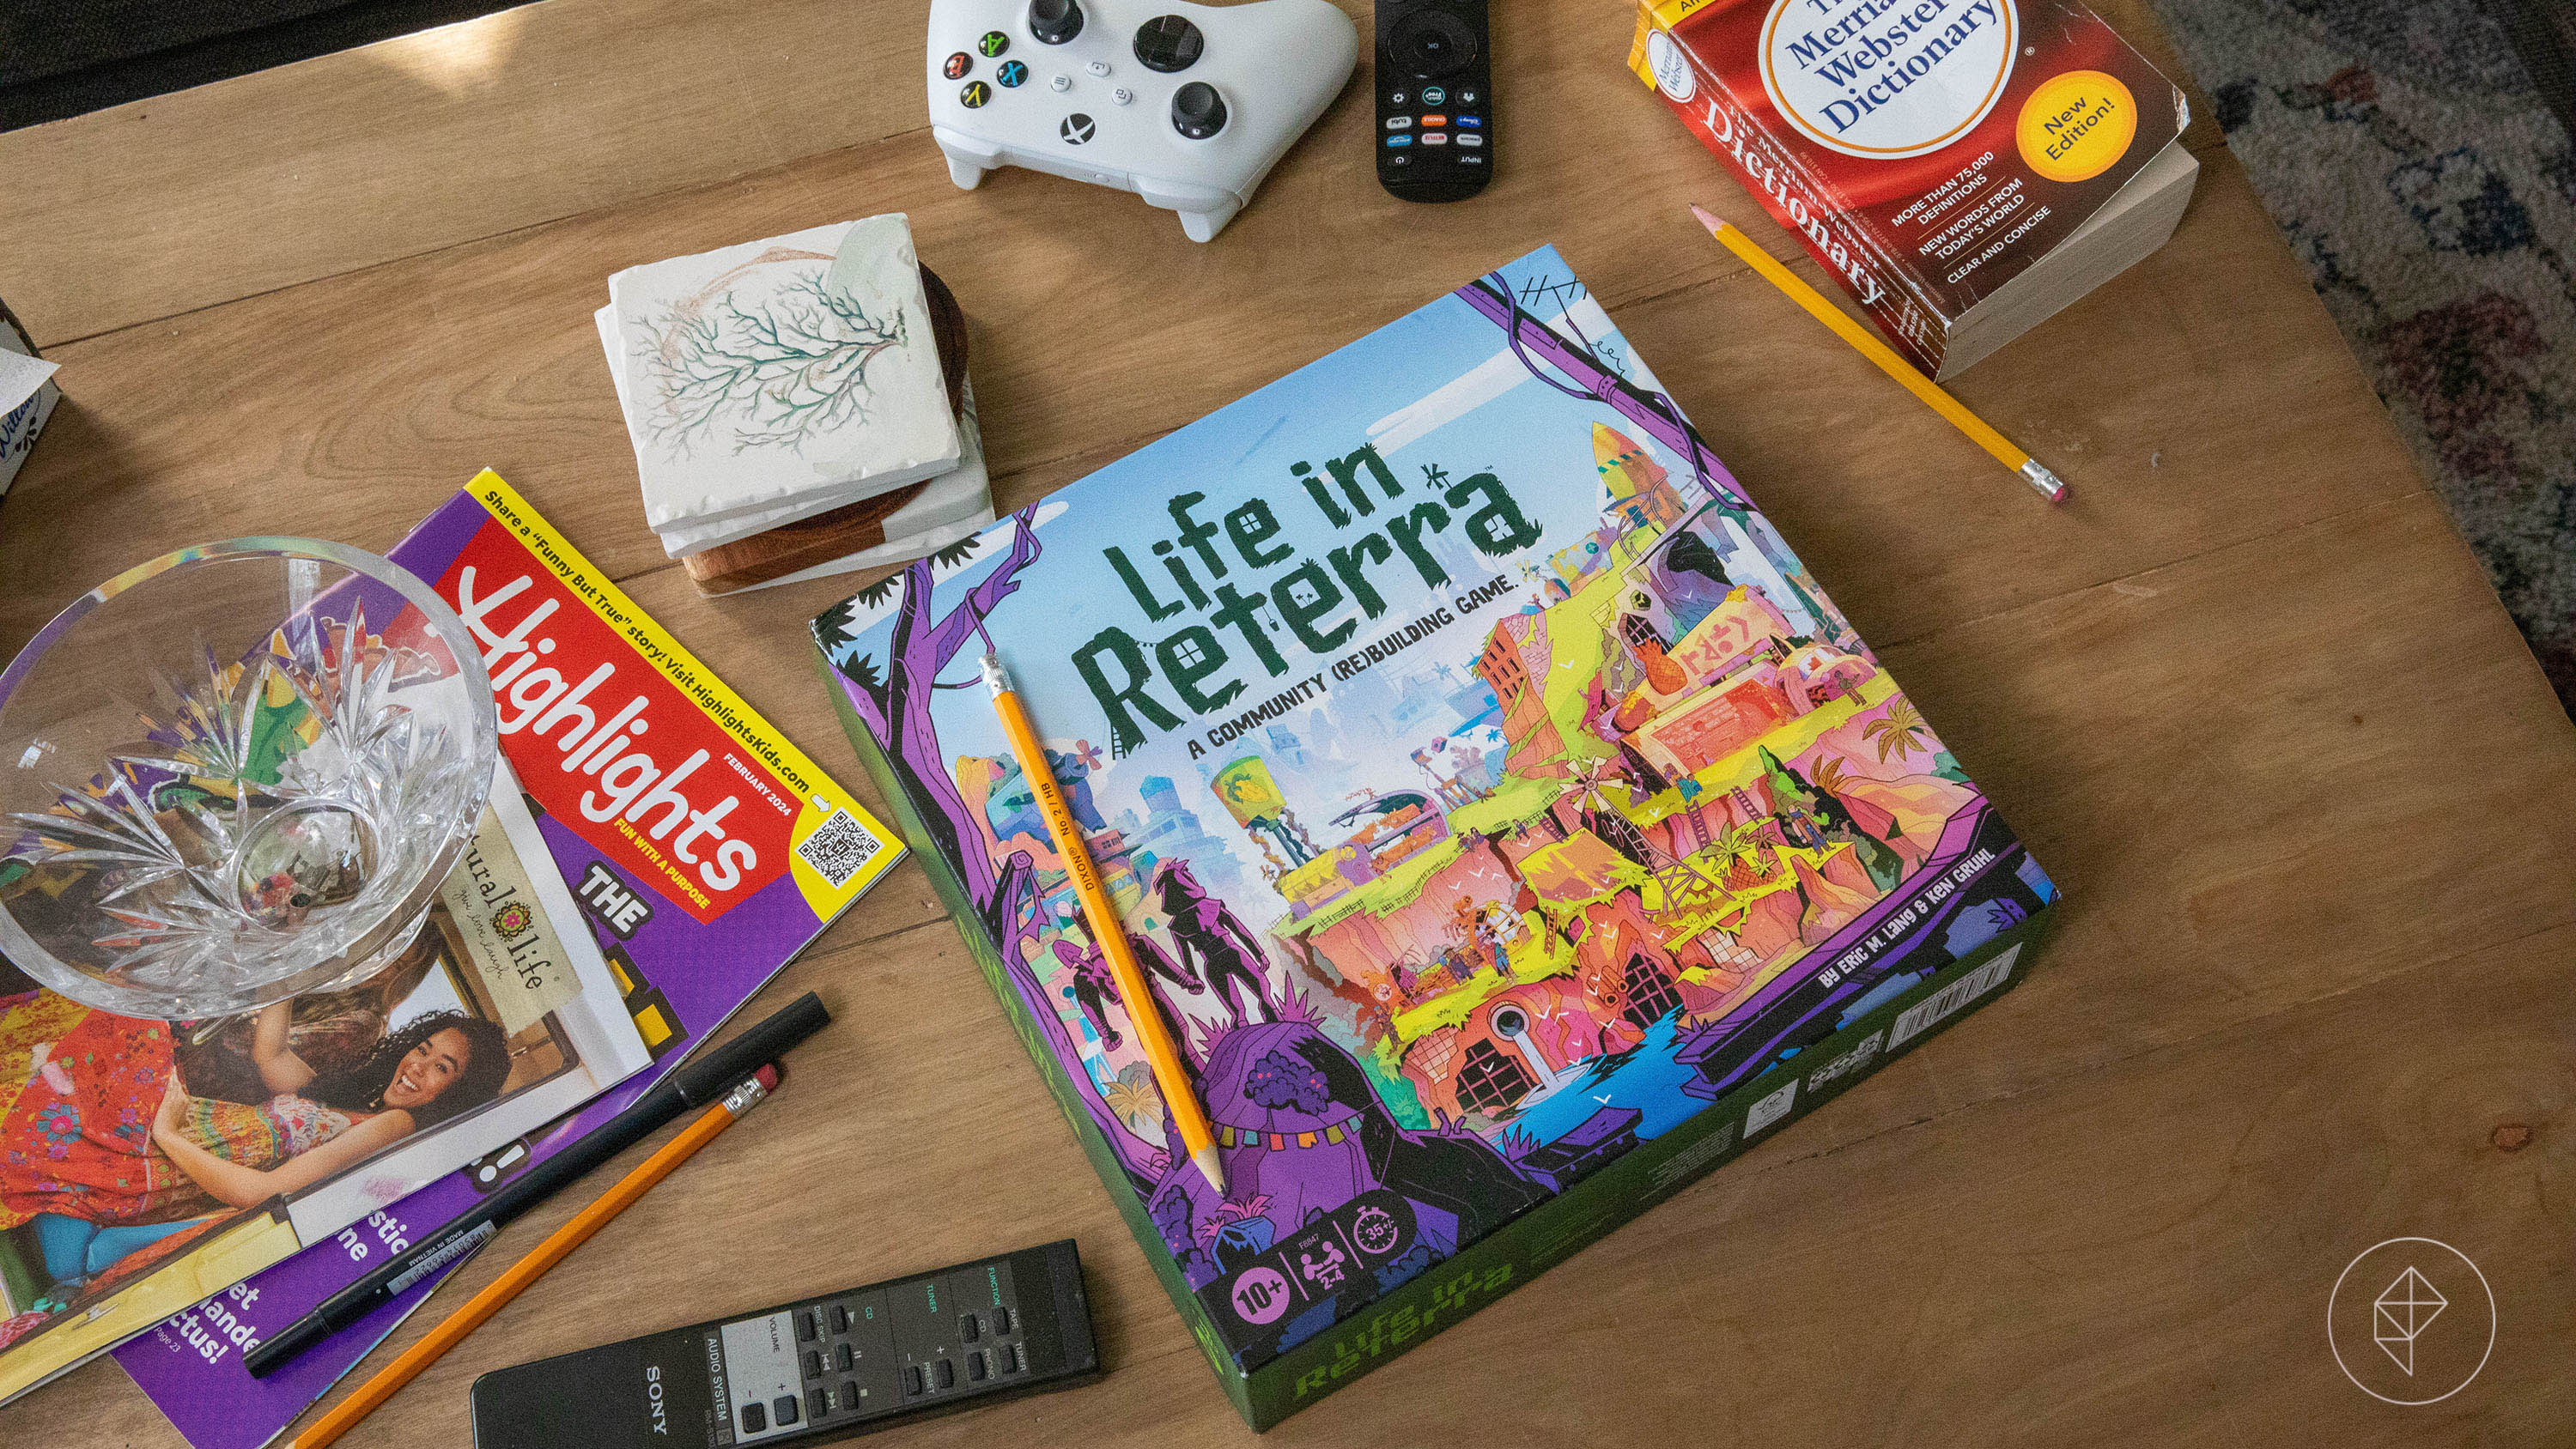 The game box for Life in Reterra on a coffee table filled with controllers, magazines, catalogs, and other detritus of modern life.